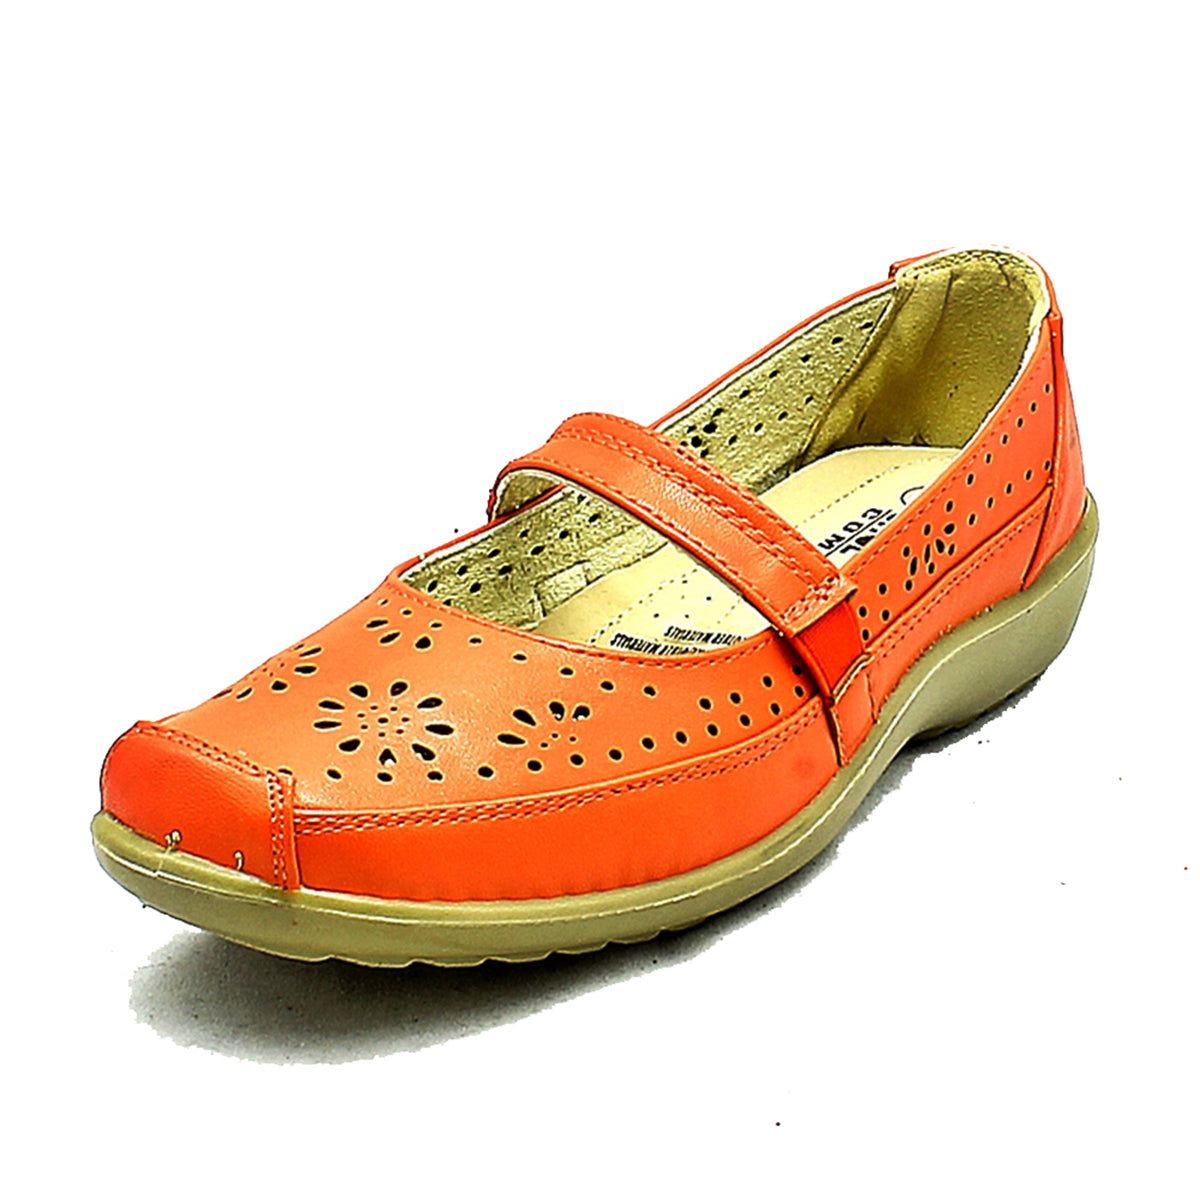 WATERMELON LOW WEDGE COMFORT SHOES WITH ELASTICATED STRAP